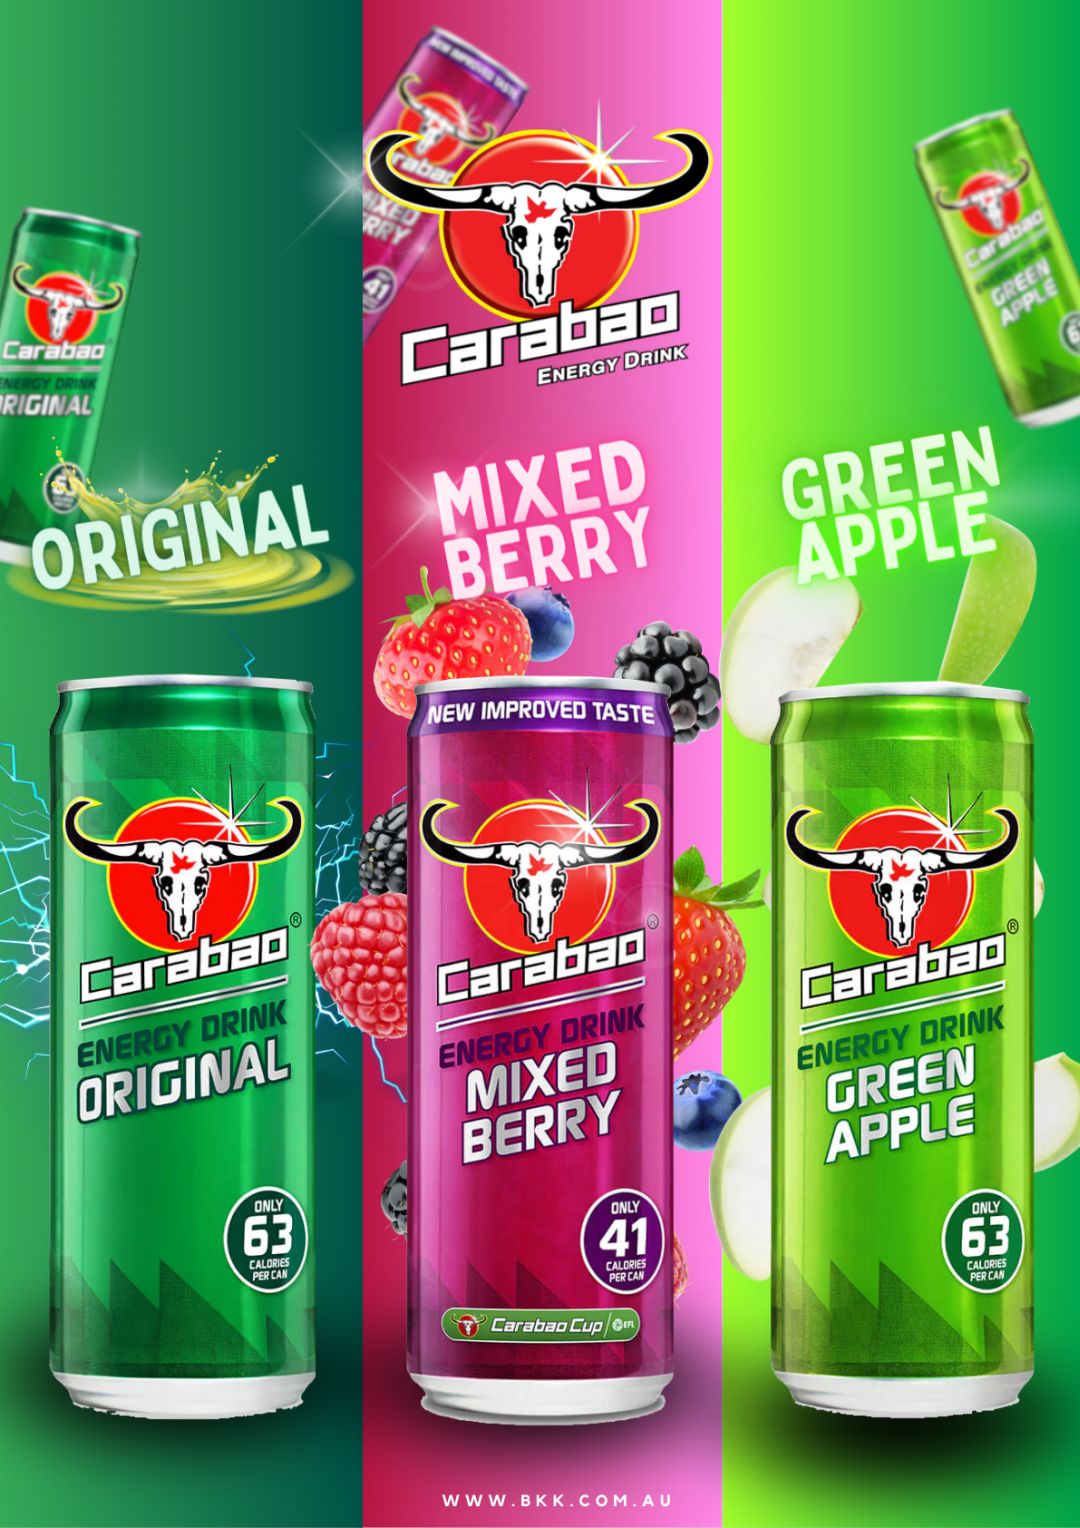 REFRESH YOUR DAY WITH OUR NEW CARABAO CARBONATED ENERGY DRINKS! Advertisement for Carabao energy drinks showcasing three flavors: Original, Mixed Berry, and Green Apple. Each flavor is represented by a vibrant, colorful background and includes' The Original flavor has a green background, the Mixed Berry flavor has a pink background with images of strawberries, blackberries, and blueberries, and the Green Apple flavor has a green background with images of green apples. The calorie content is displayed as 63 calories per can for Original and Green Apple, and 41 calories per can for Mixed Berry.